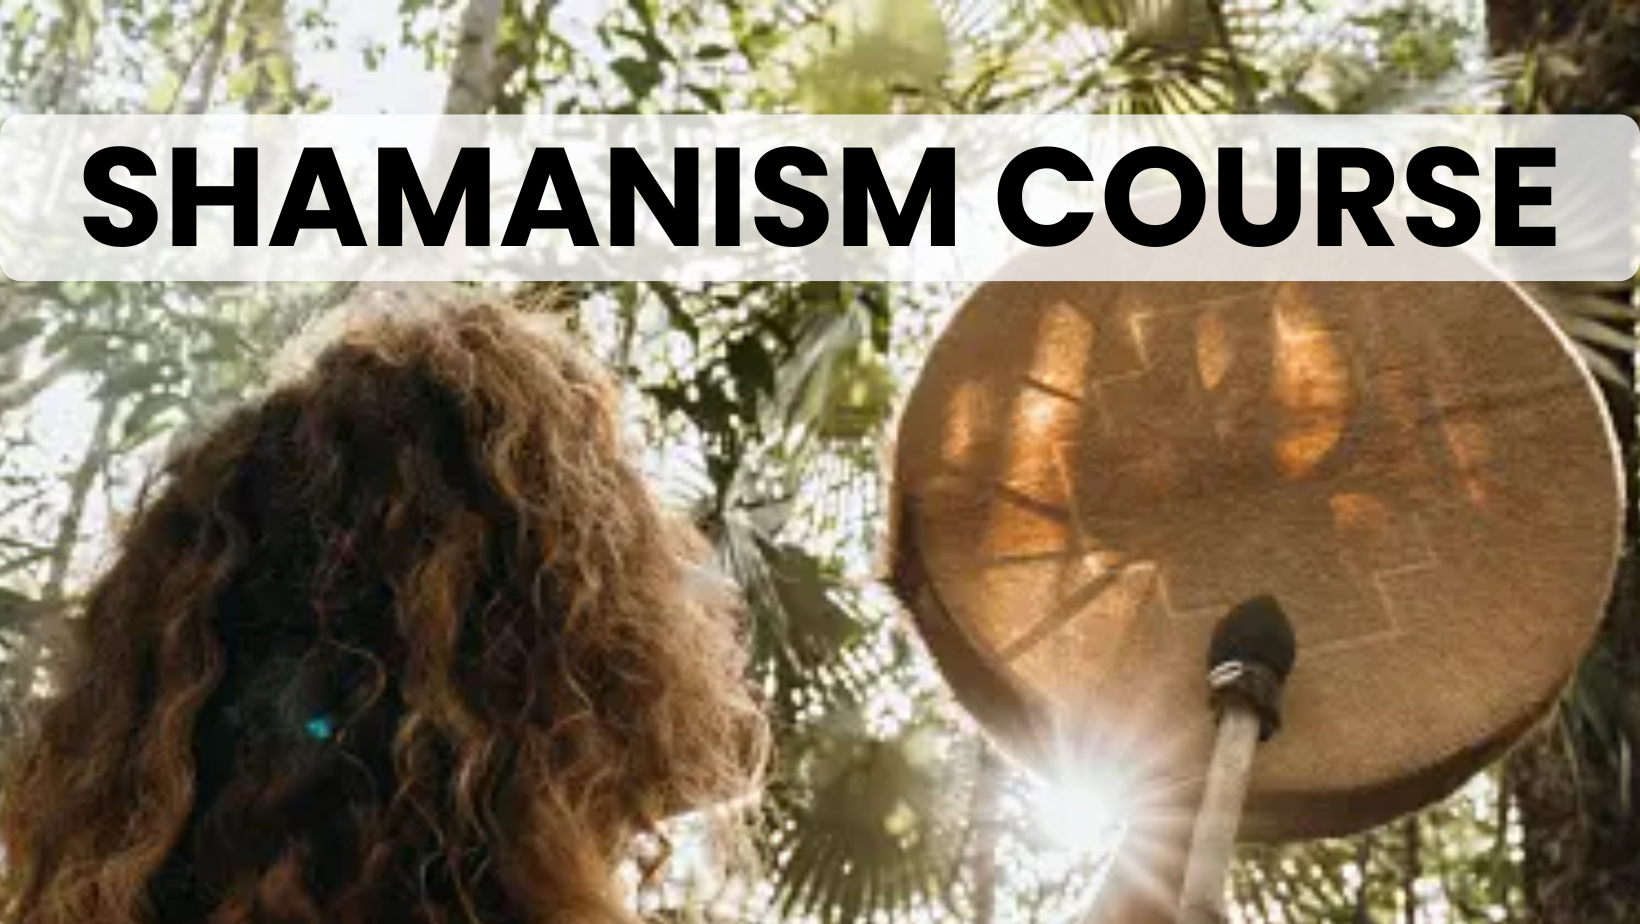 Shamanism Courses in Lucknow